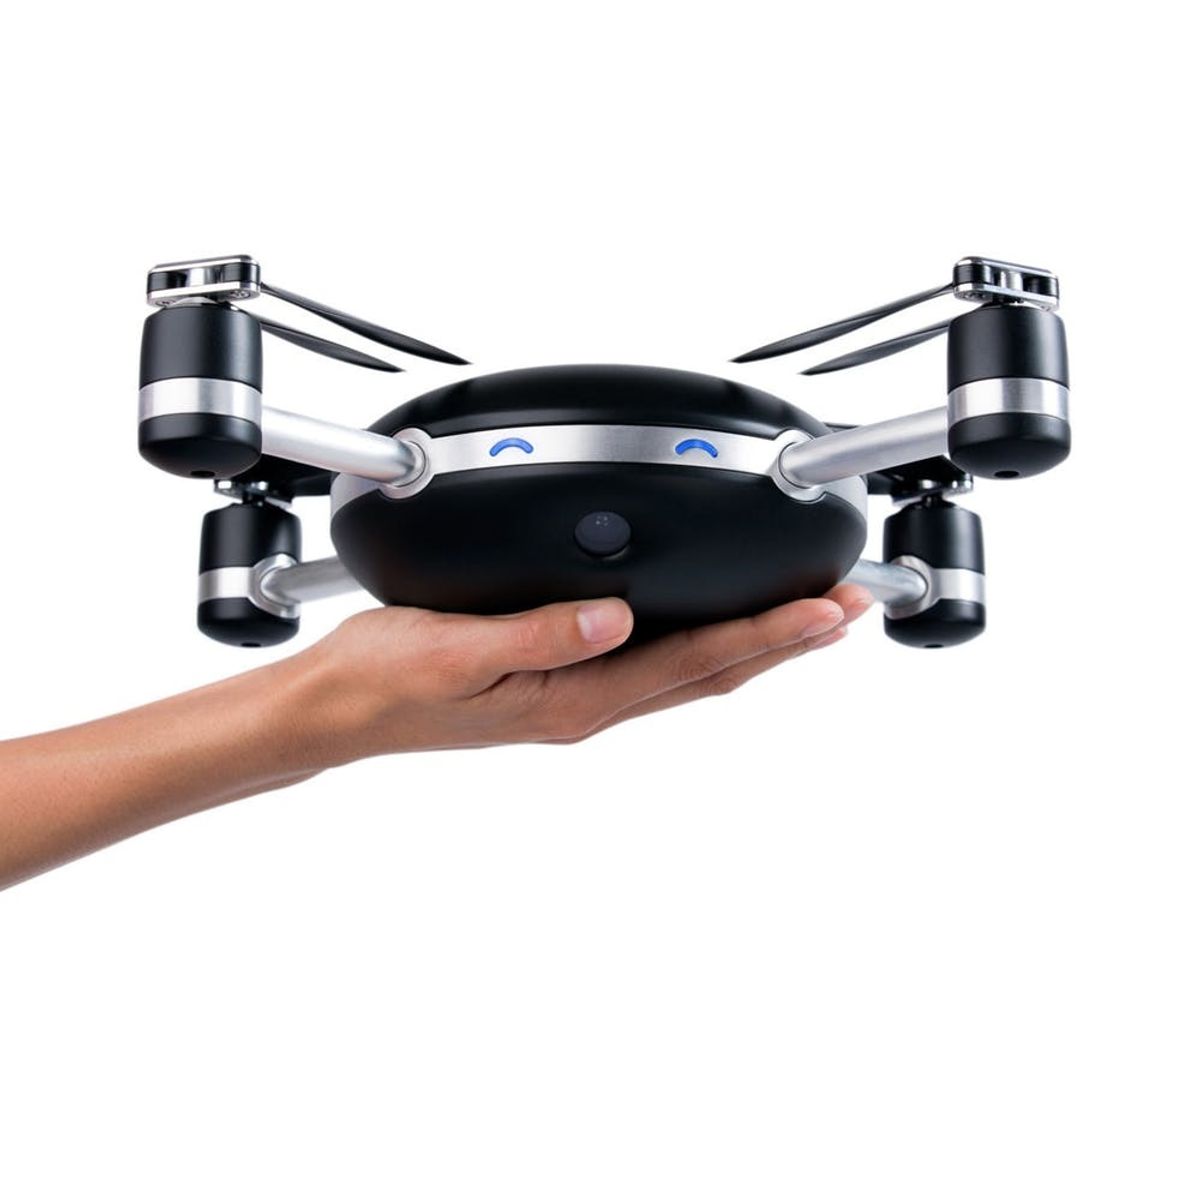 This Is the Drone That Will Make You Actually Want One